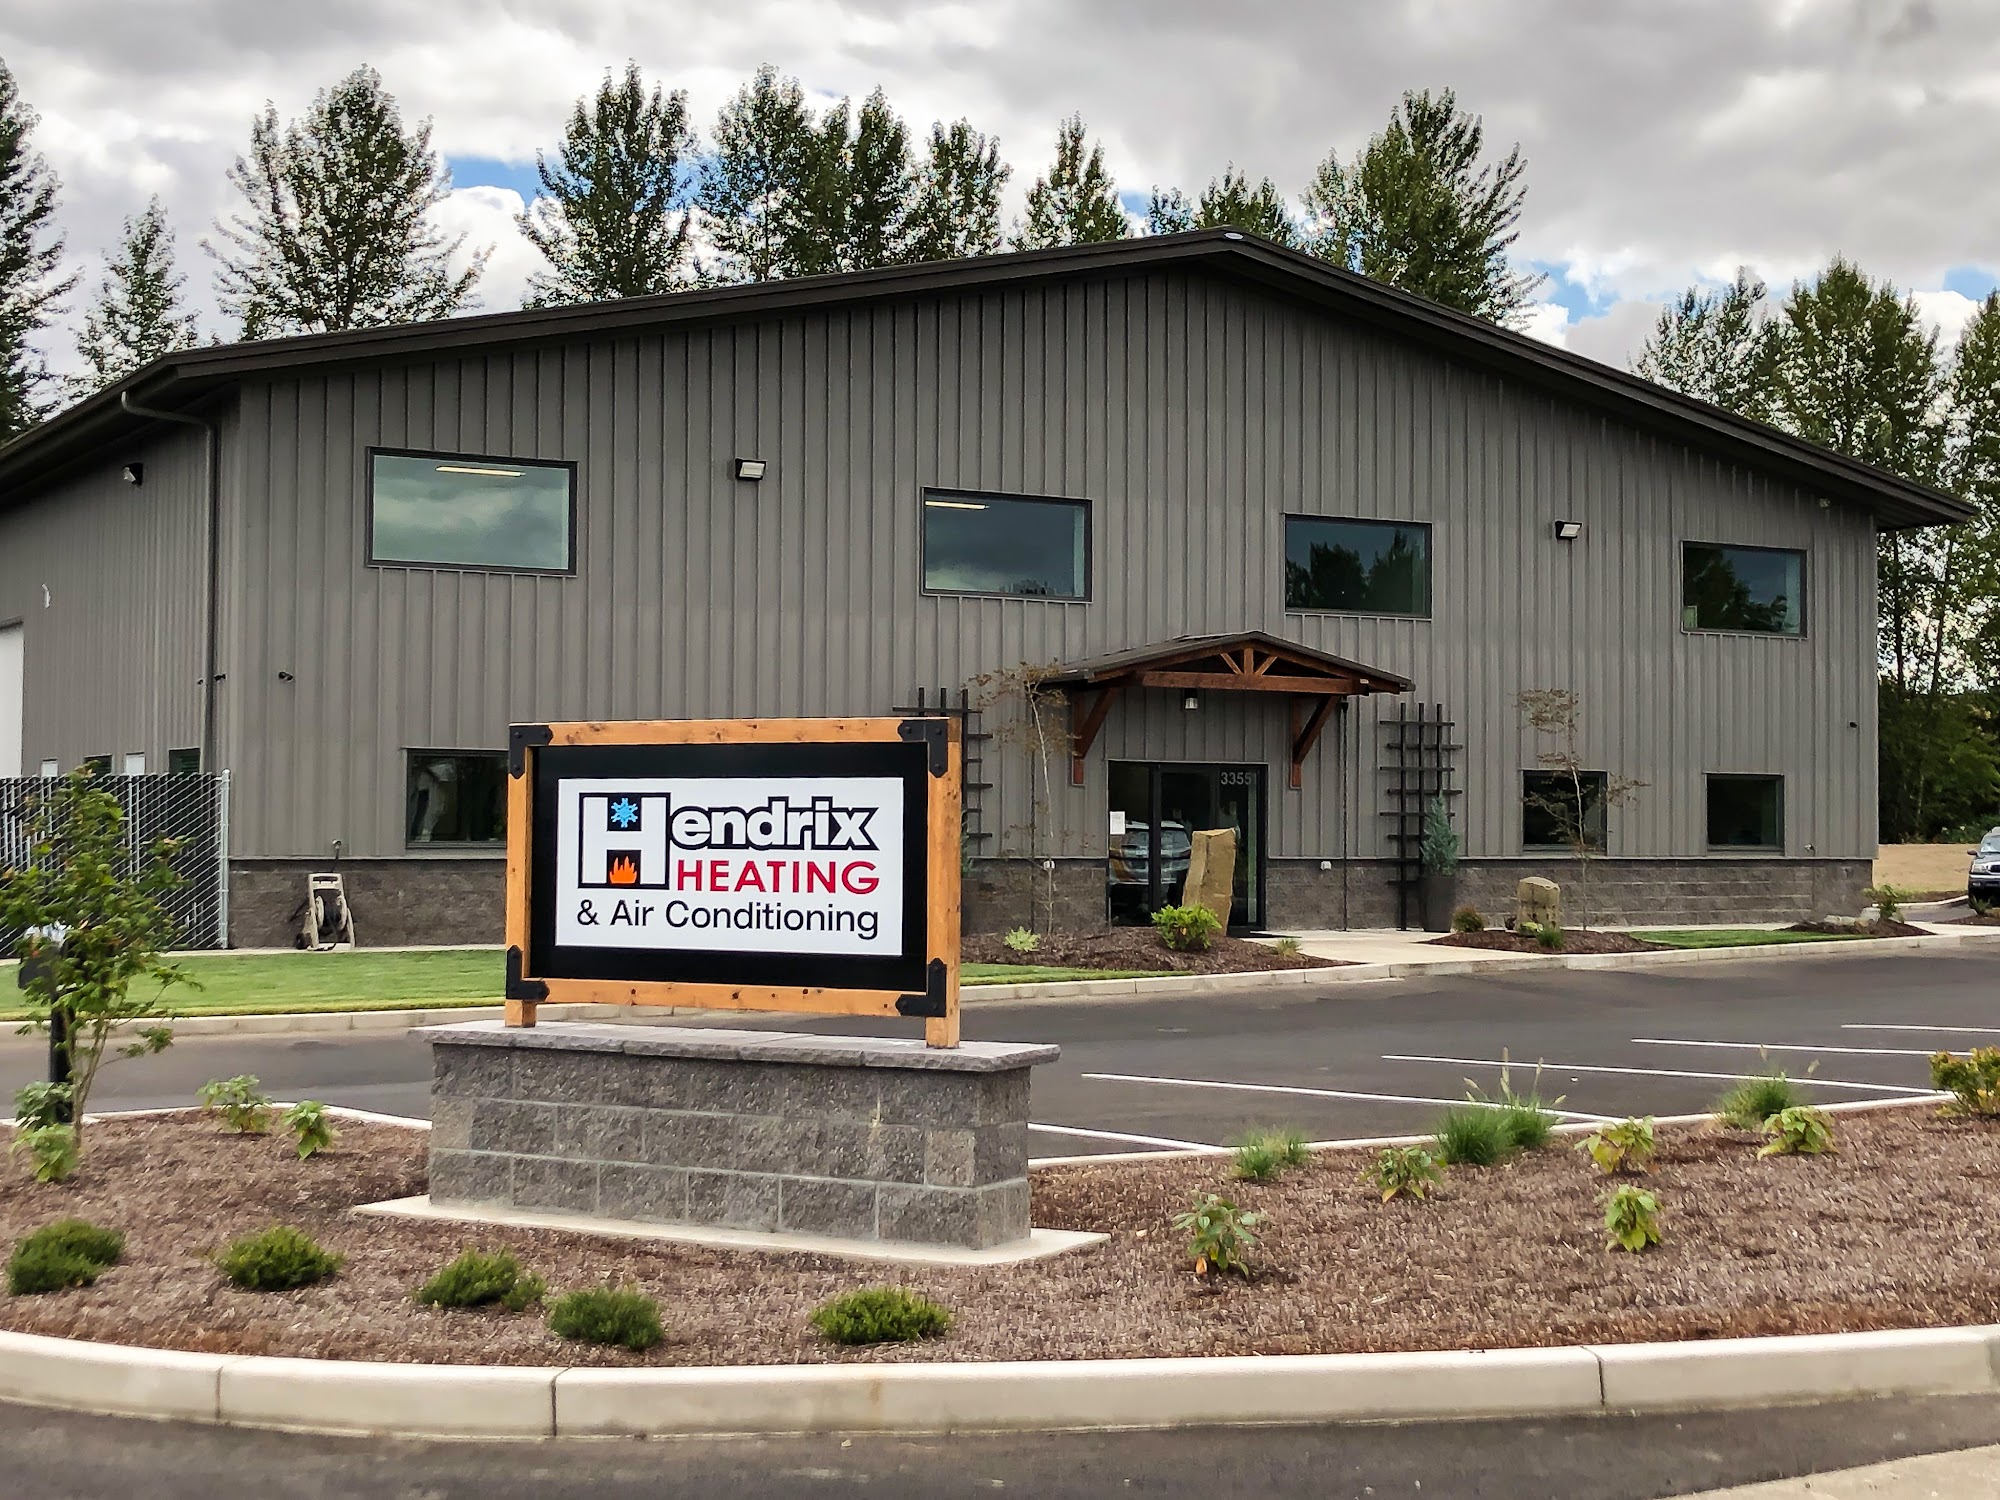 Hendrix Heating & Air Conditioning 33551 Eagle Rd, Tangent Oregon 97389